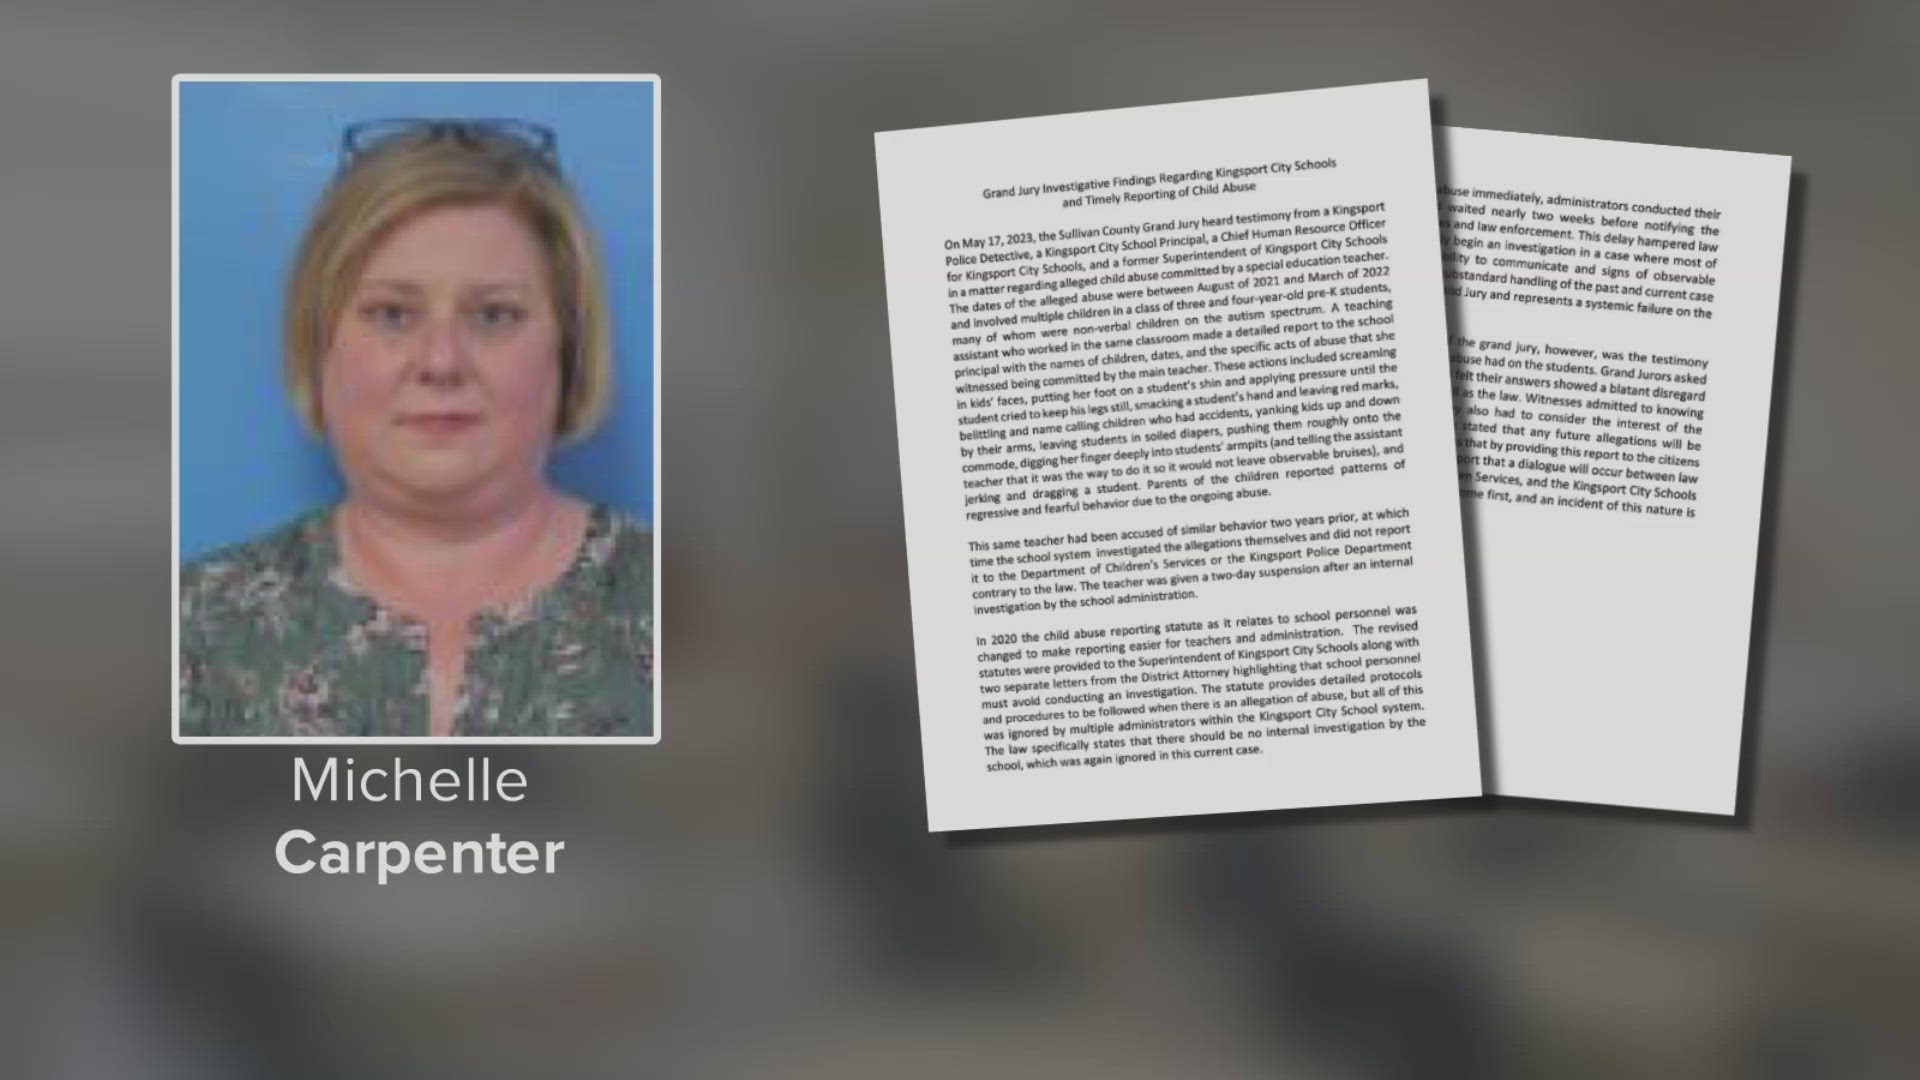 Michelle Carpenter used to work at Kingsport City Schools, and court documents show the abuse happened between Aug. 2021 and March 2022.